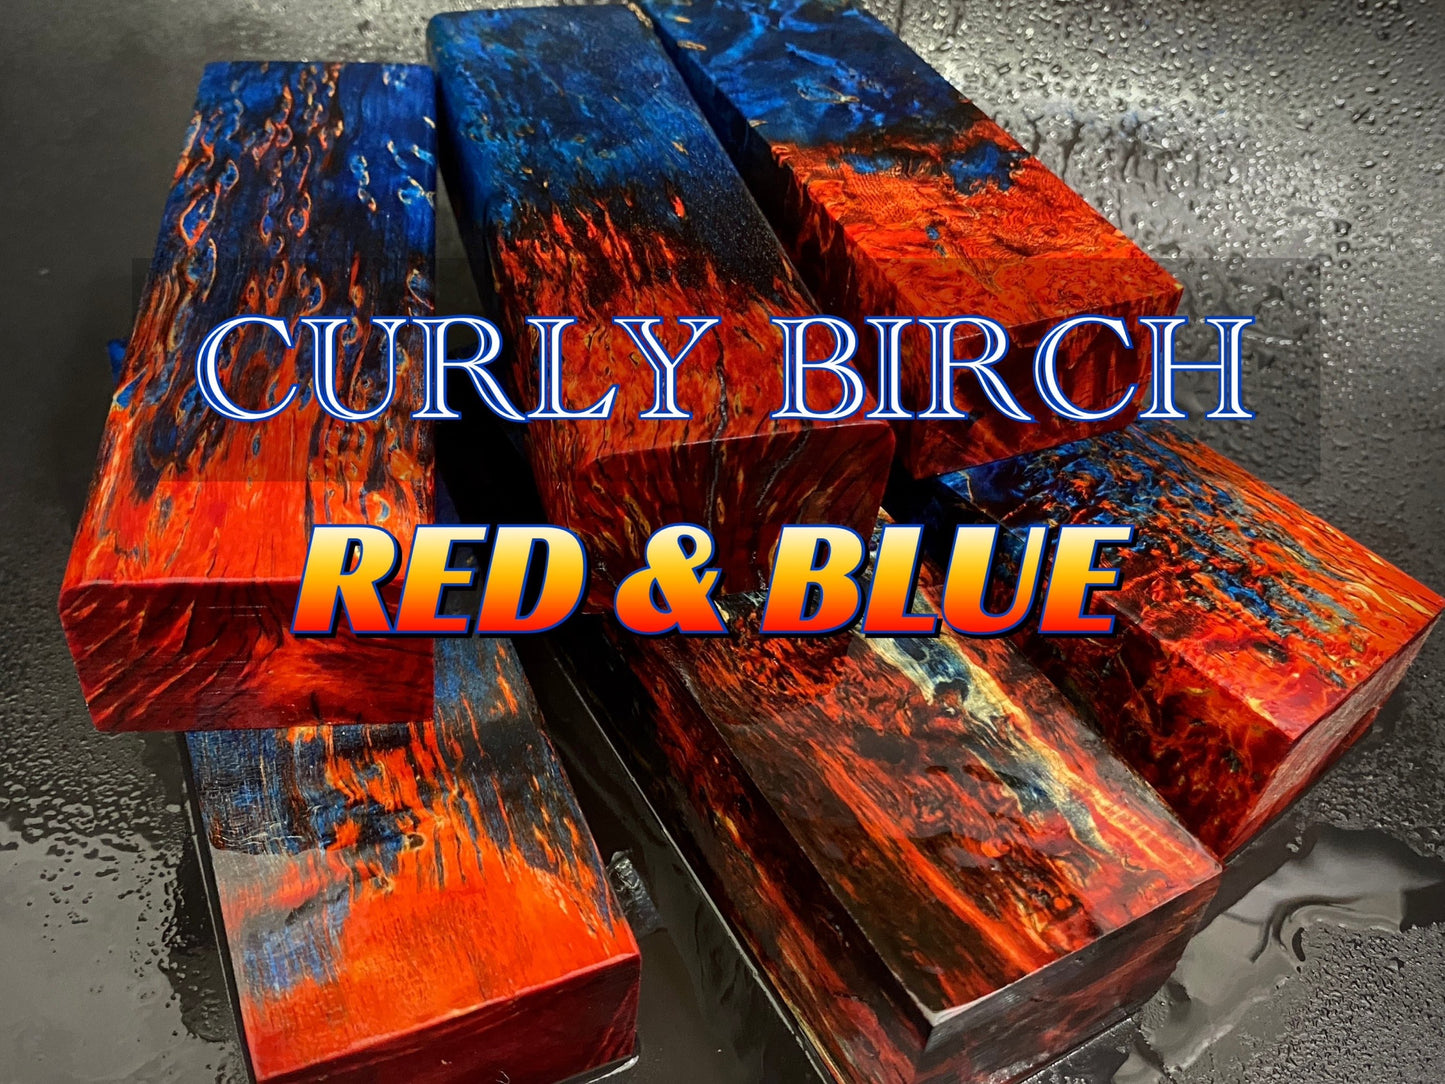 CURLY BIRCH Stabilized Wood, Red & Blue Colors, Blanks for Woodworking. France Stock.